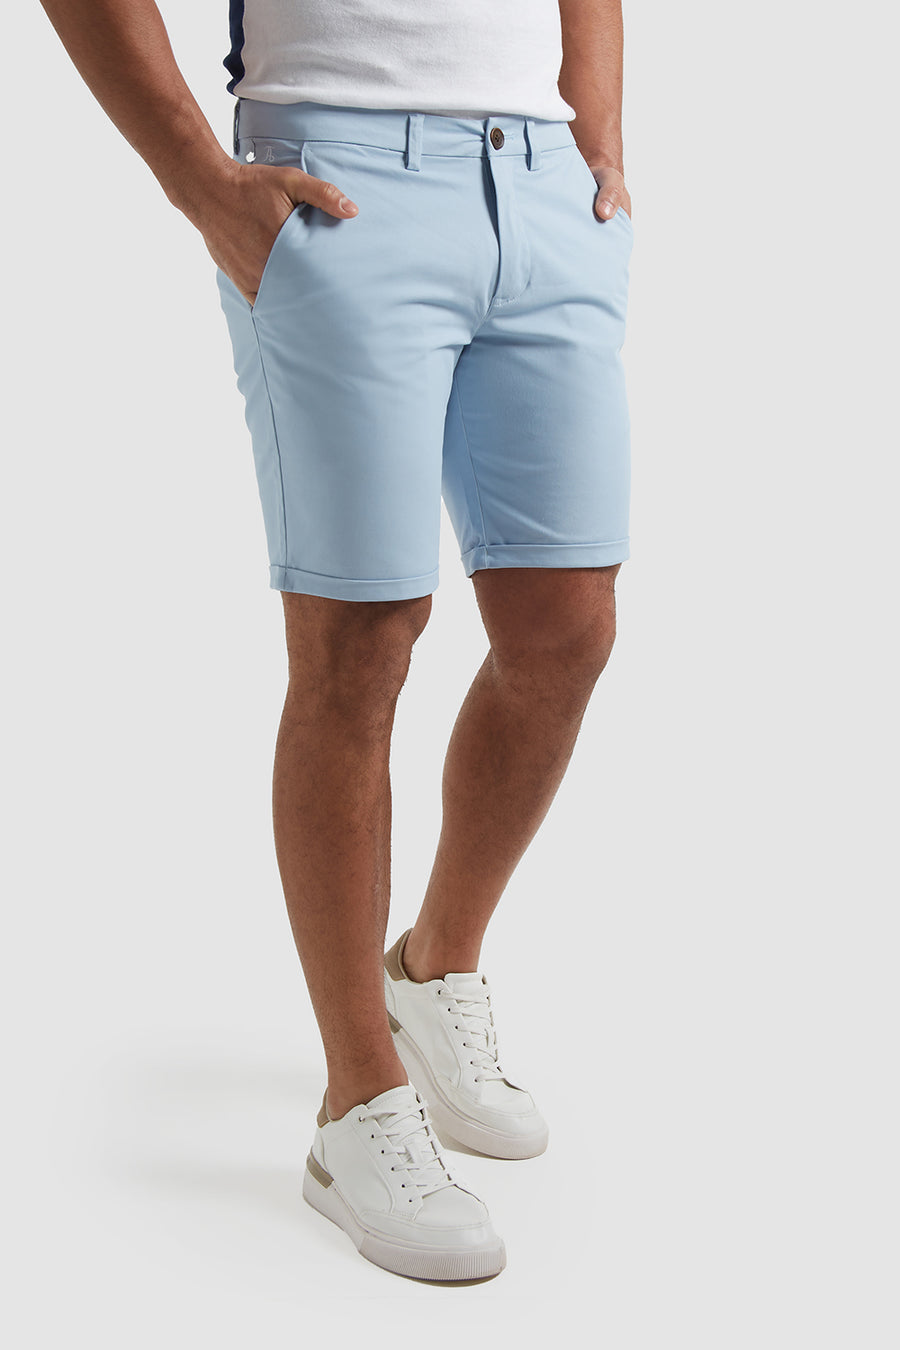 - Chino Navy Fit TAILORED Shorts in - ATHLETE Athletic USA